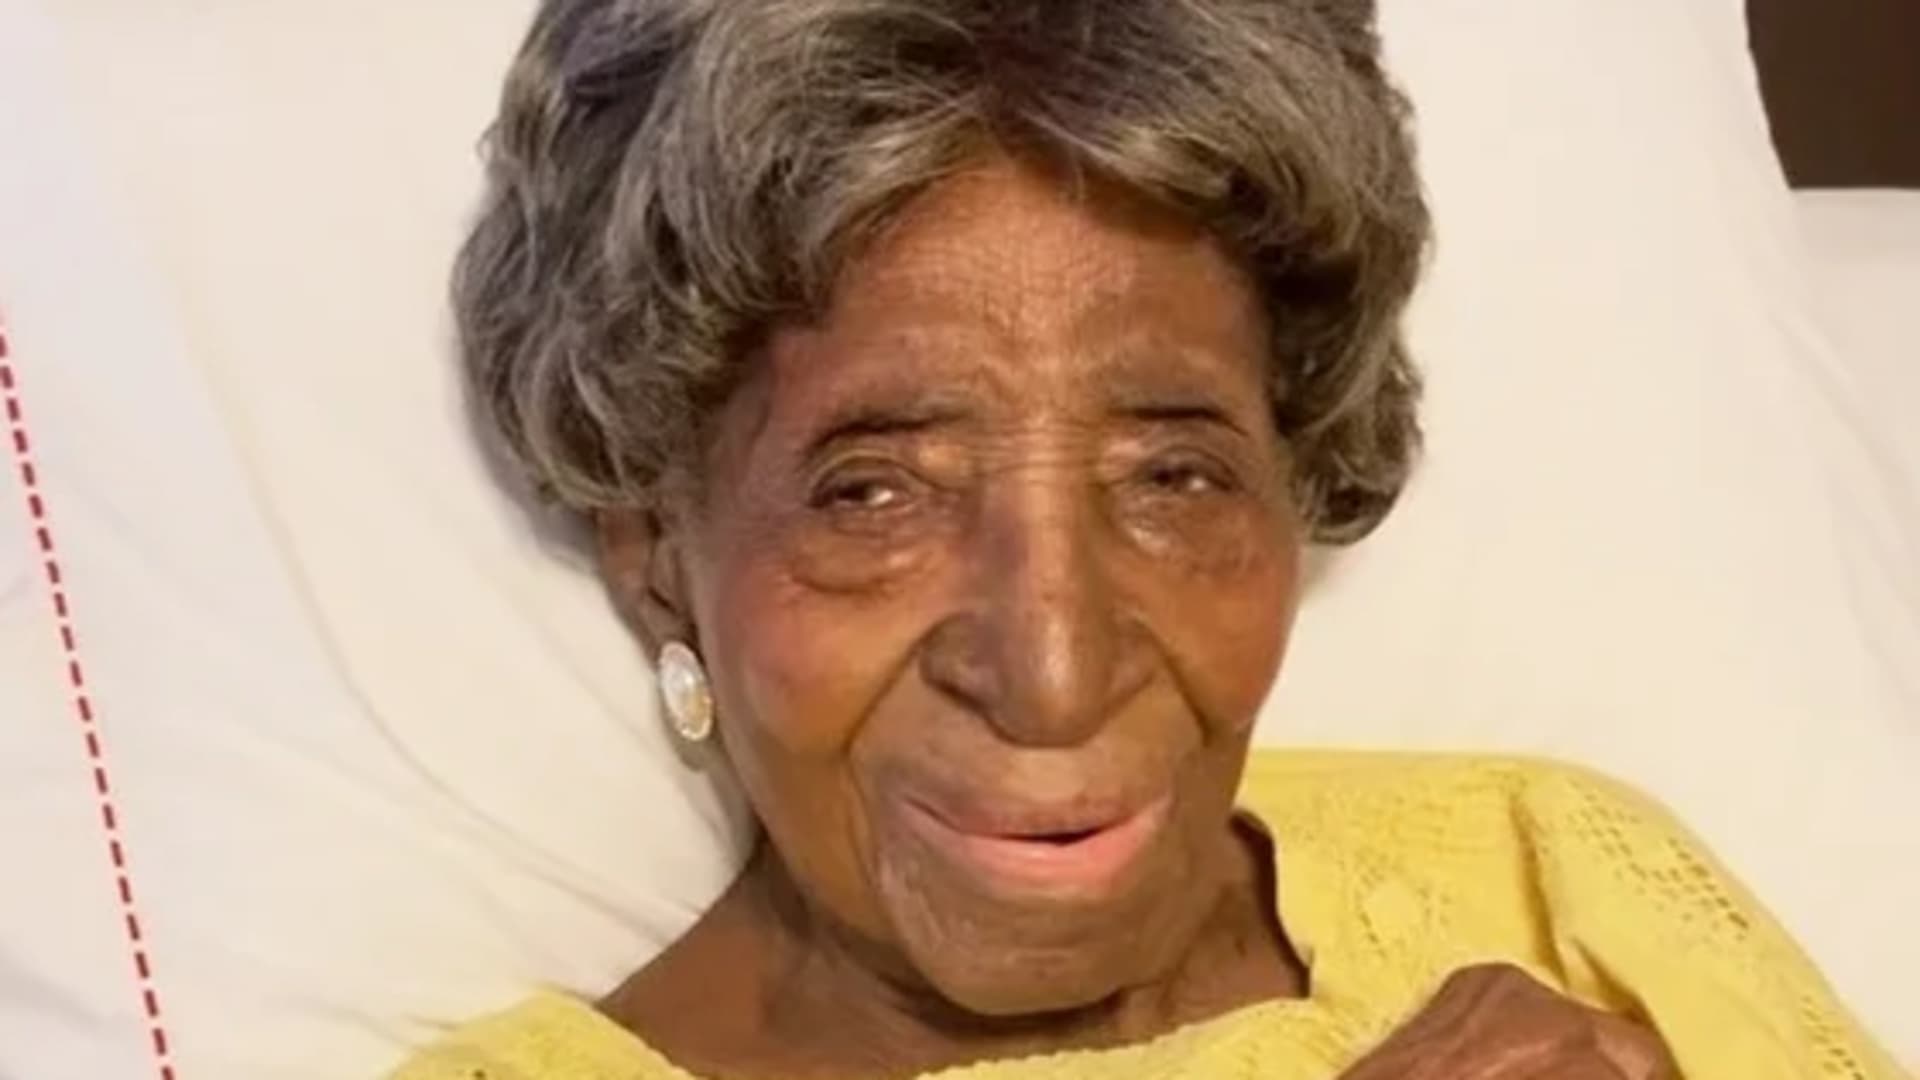 The oldest living person in the U.S. just turned 115: 'Speak your mind and don’t hold your tongue,' she says